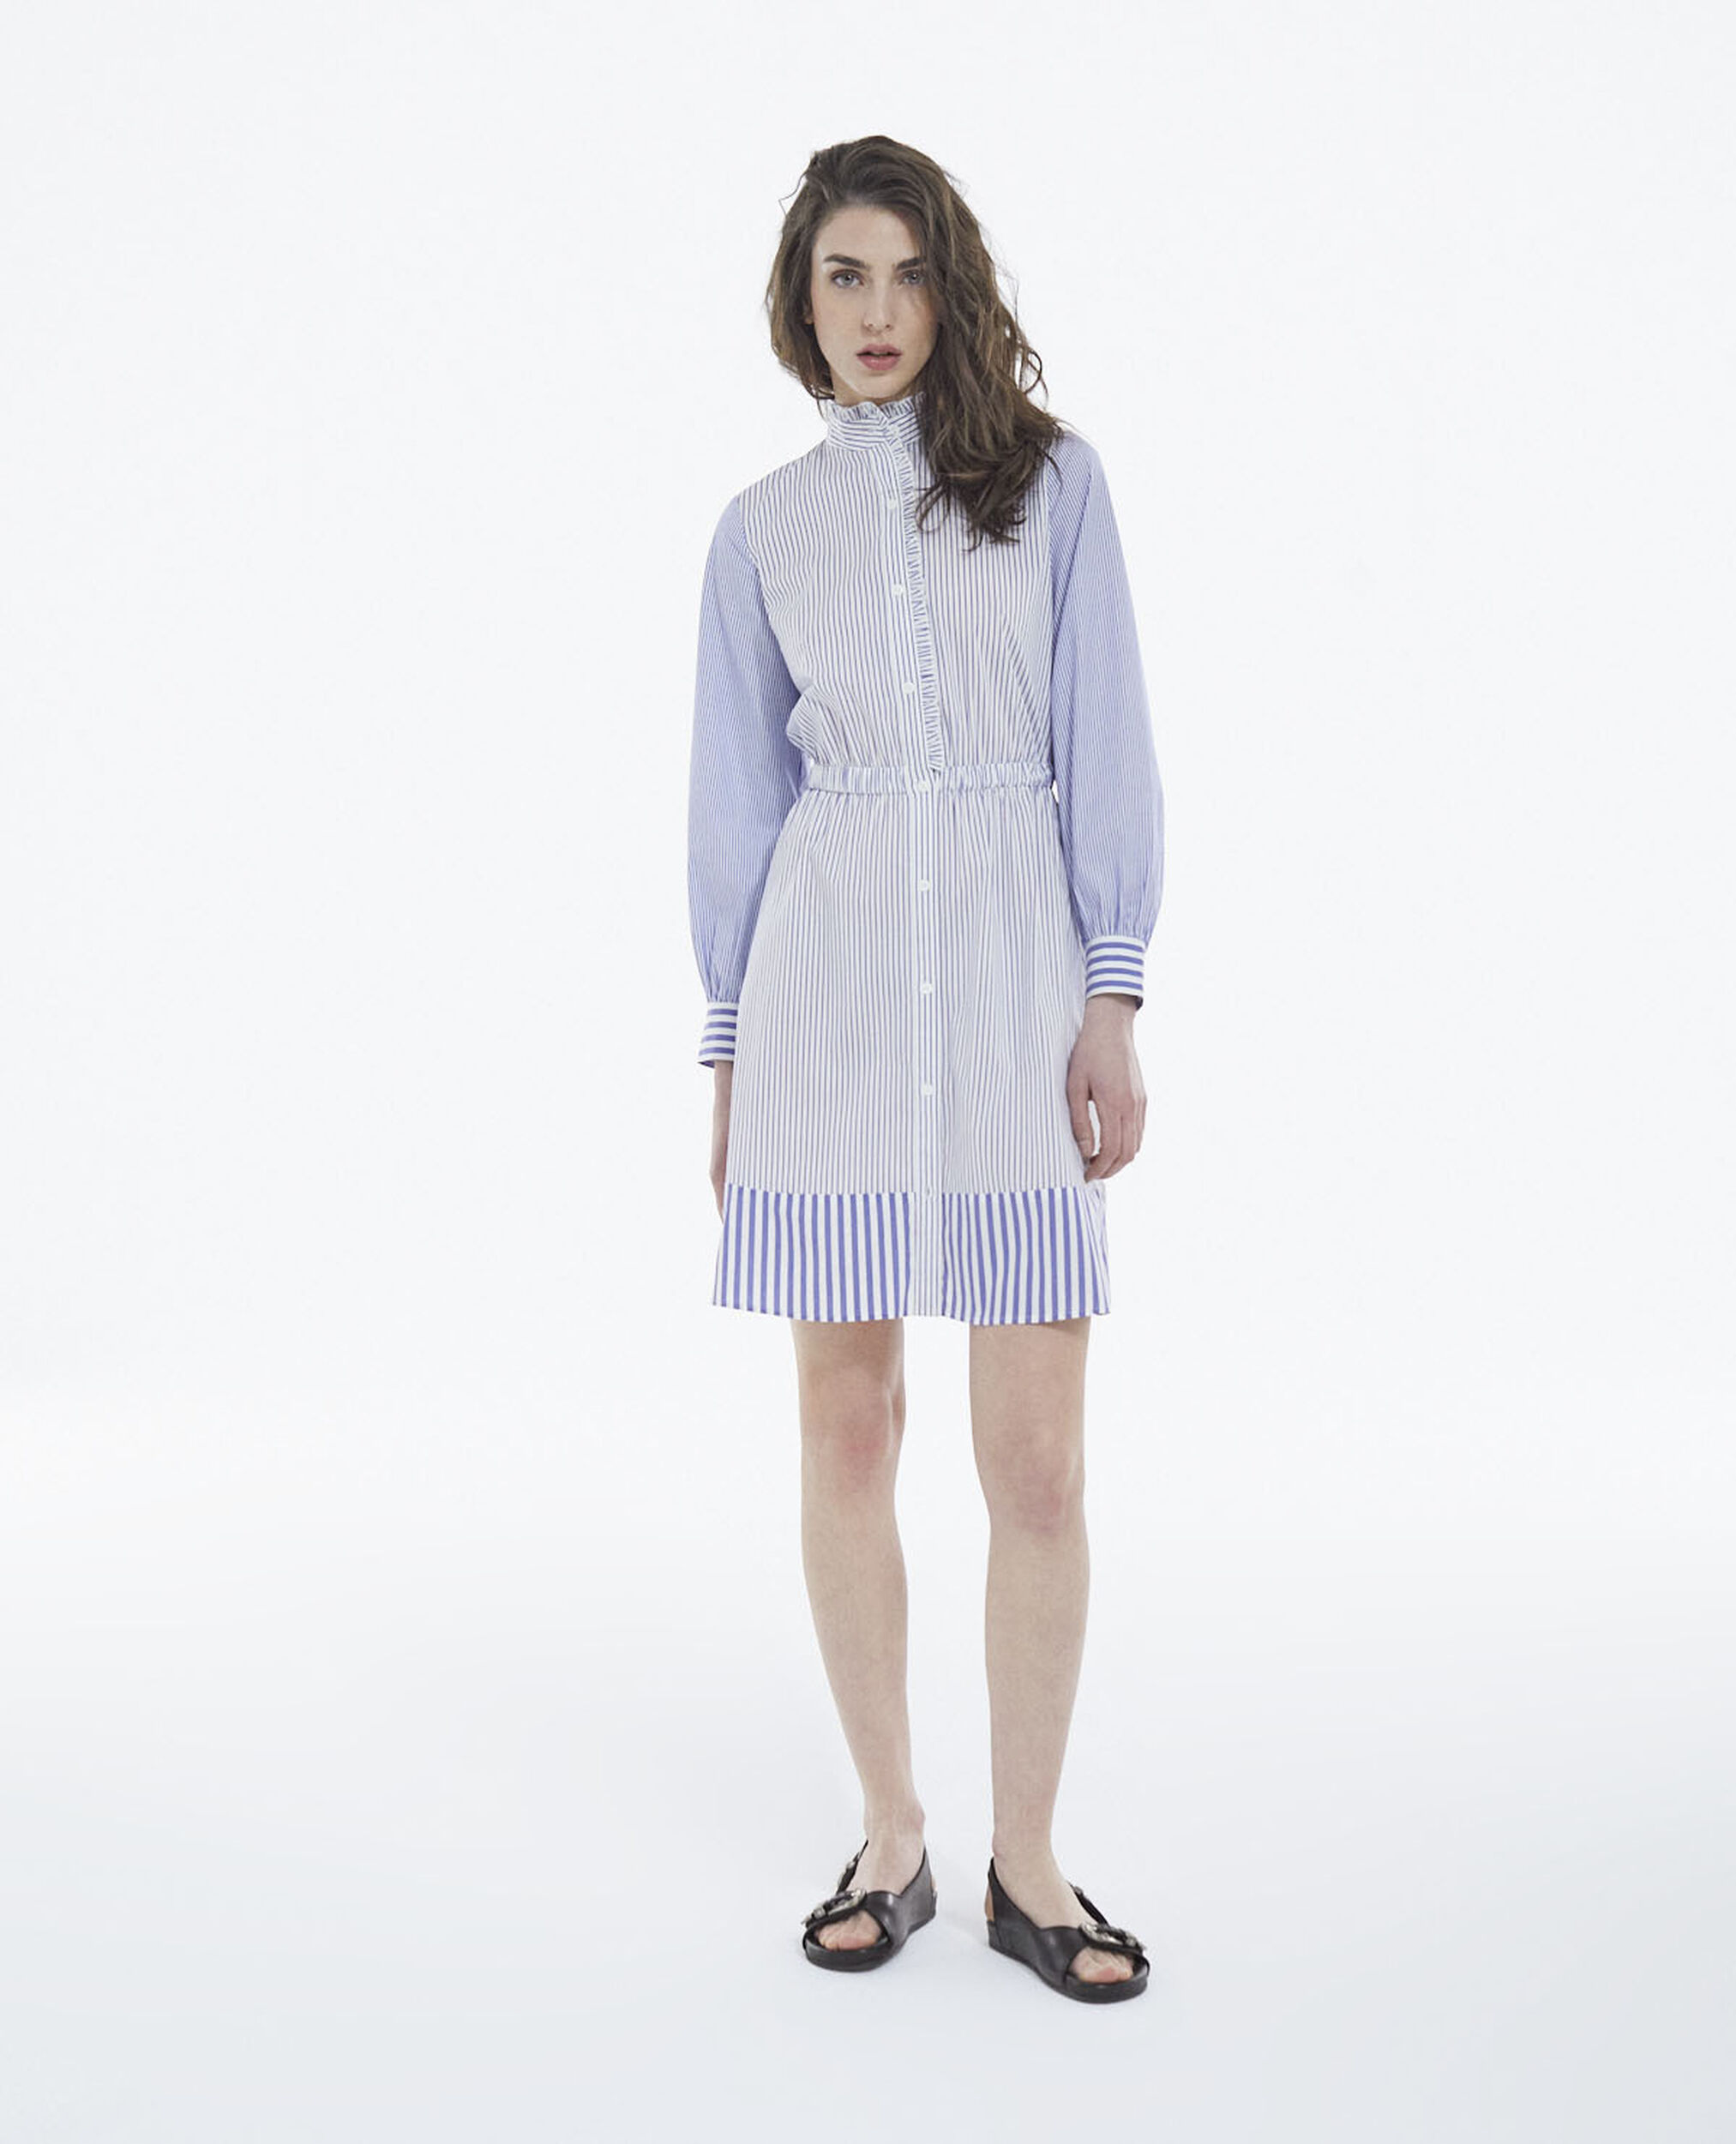 Short sky blue striped dress with high neck, BLUE WHITE, hi-res image number null